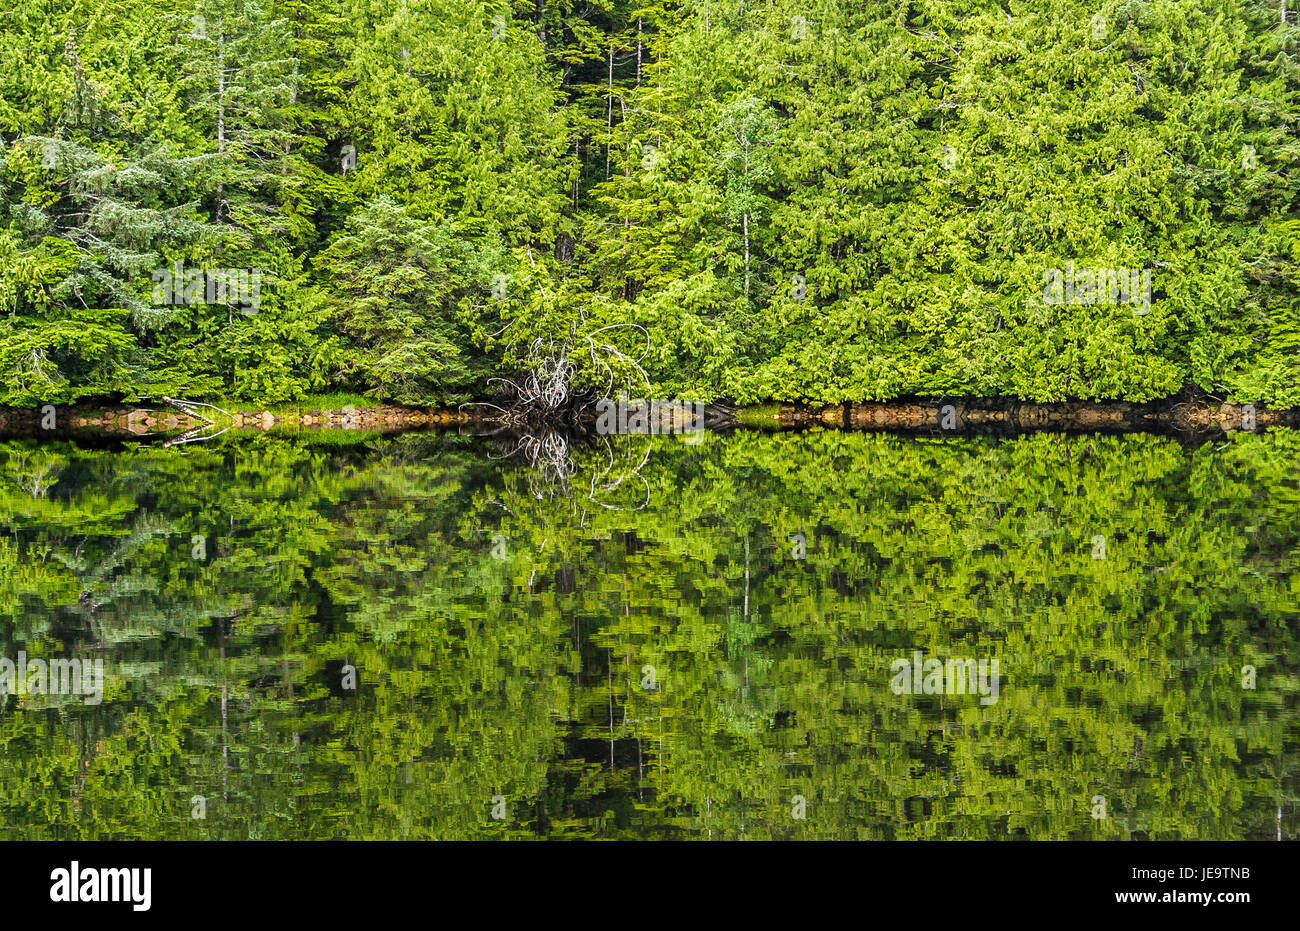 The forest and shoreline are mirrored in the water, with symmetric, totem-like reflections in this semi-abstract landscape. Stock Photo